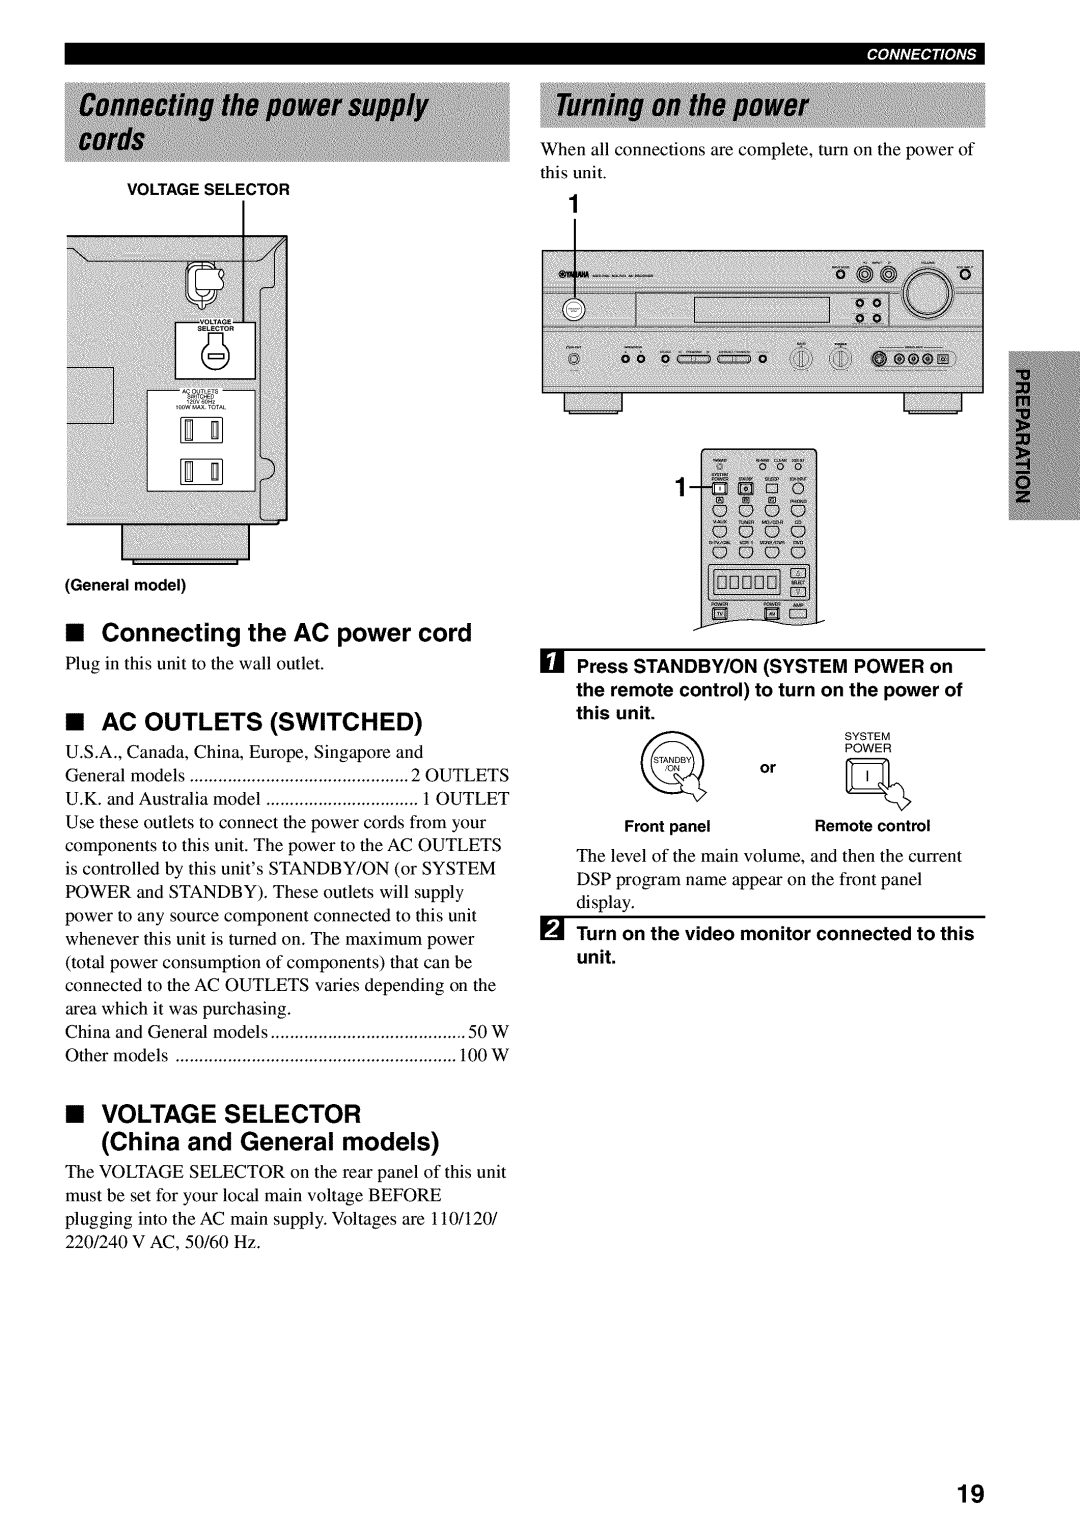 Yamaha RX-V730 Connecting the AC power cord, Ac Outlets, Switched, China and General models, • Voltage Selector 